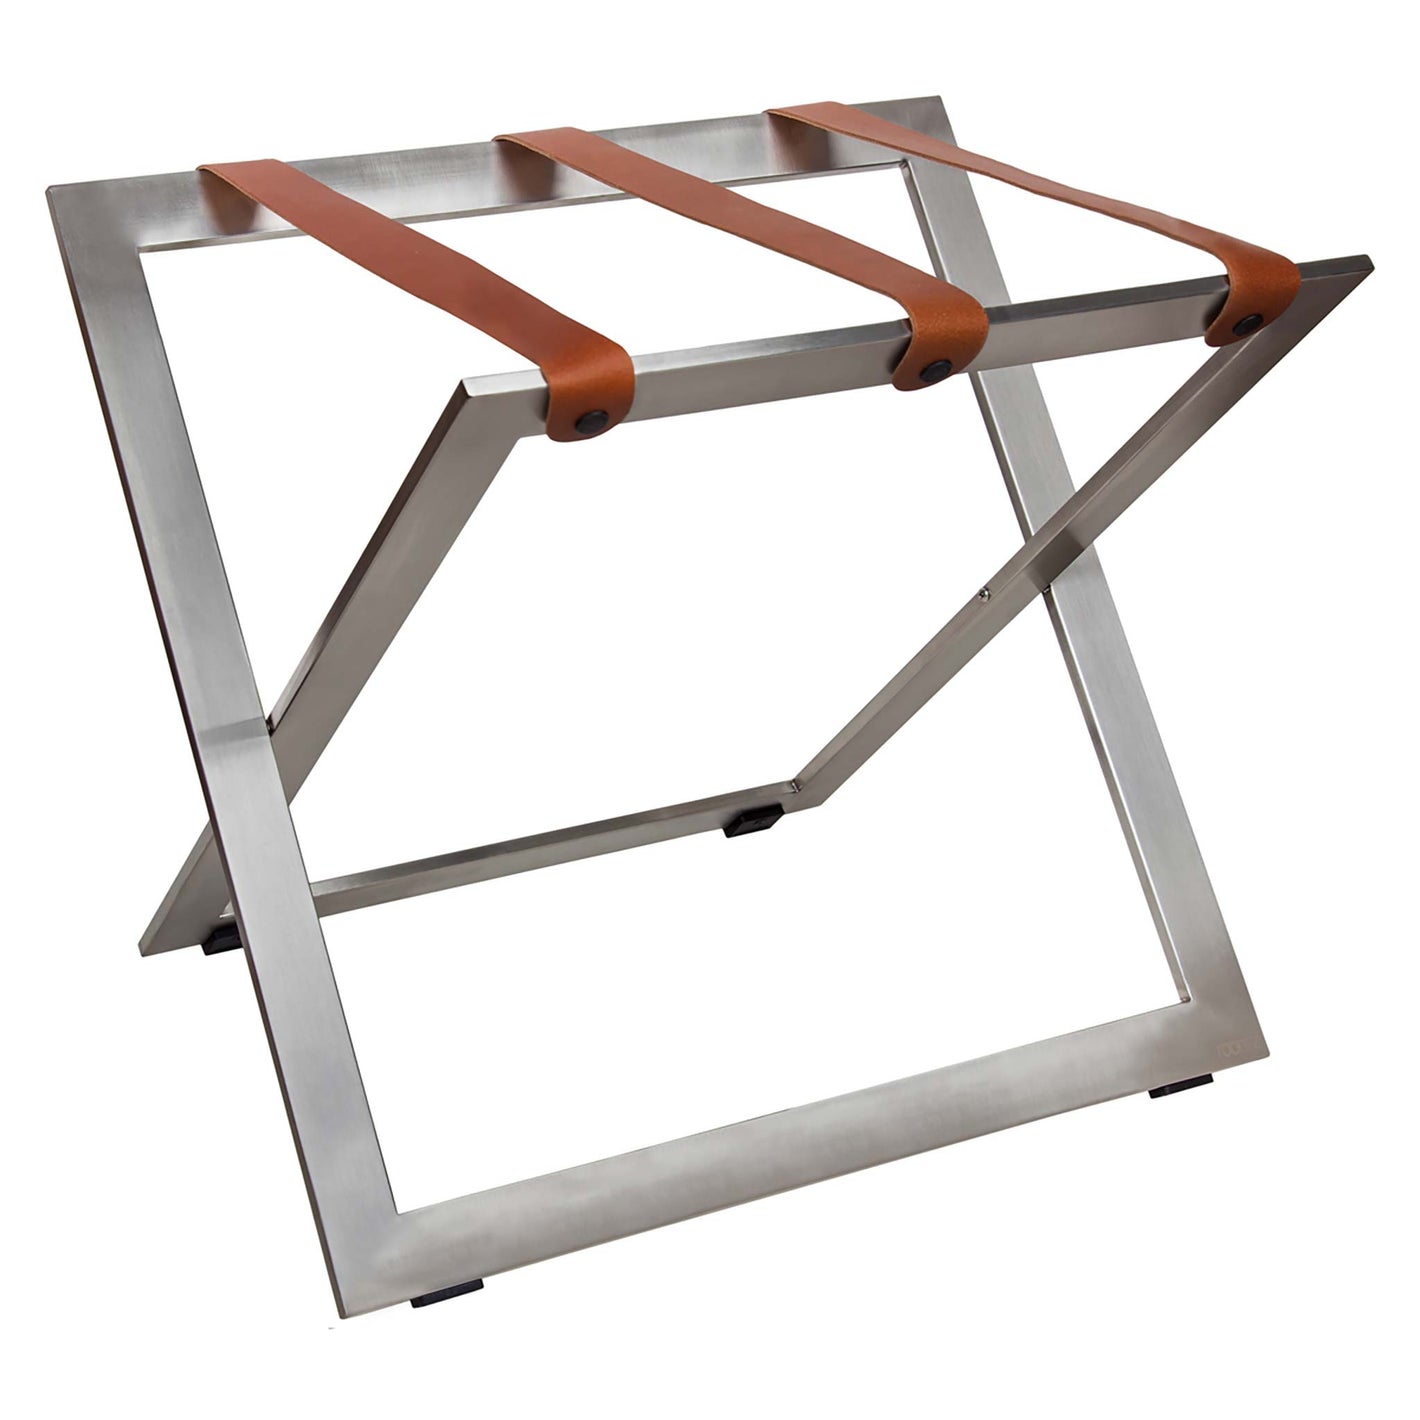 Roootz stainless steel compact hotel luggage rack with cognac brown leather straps